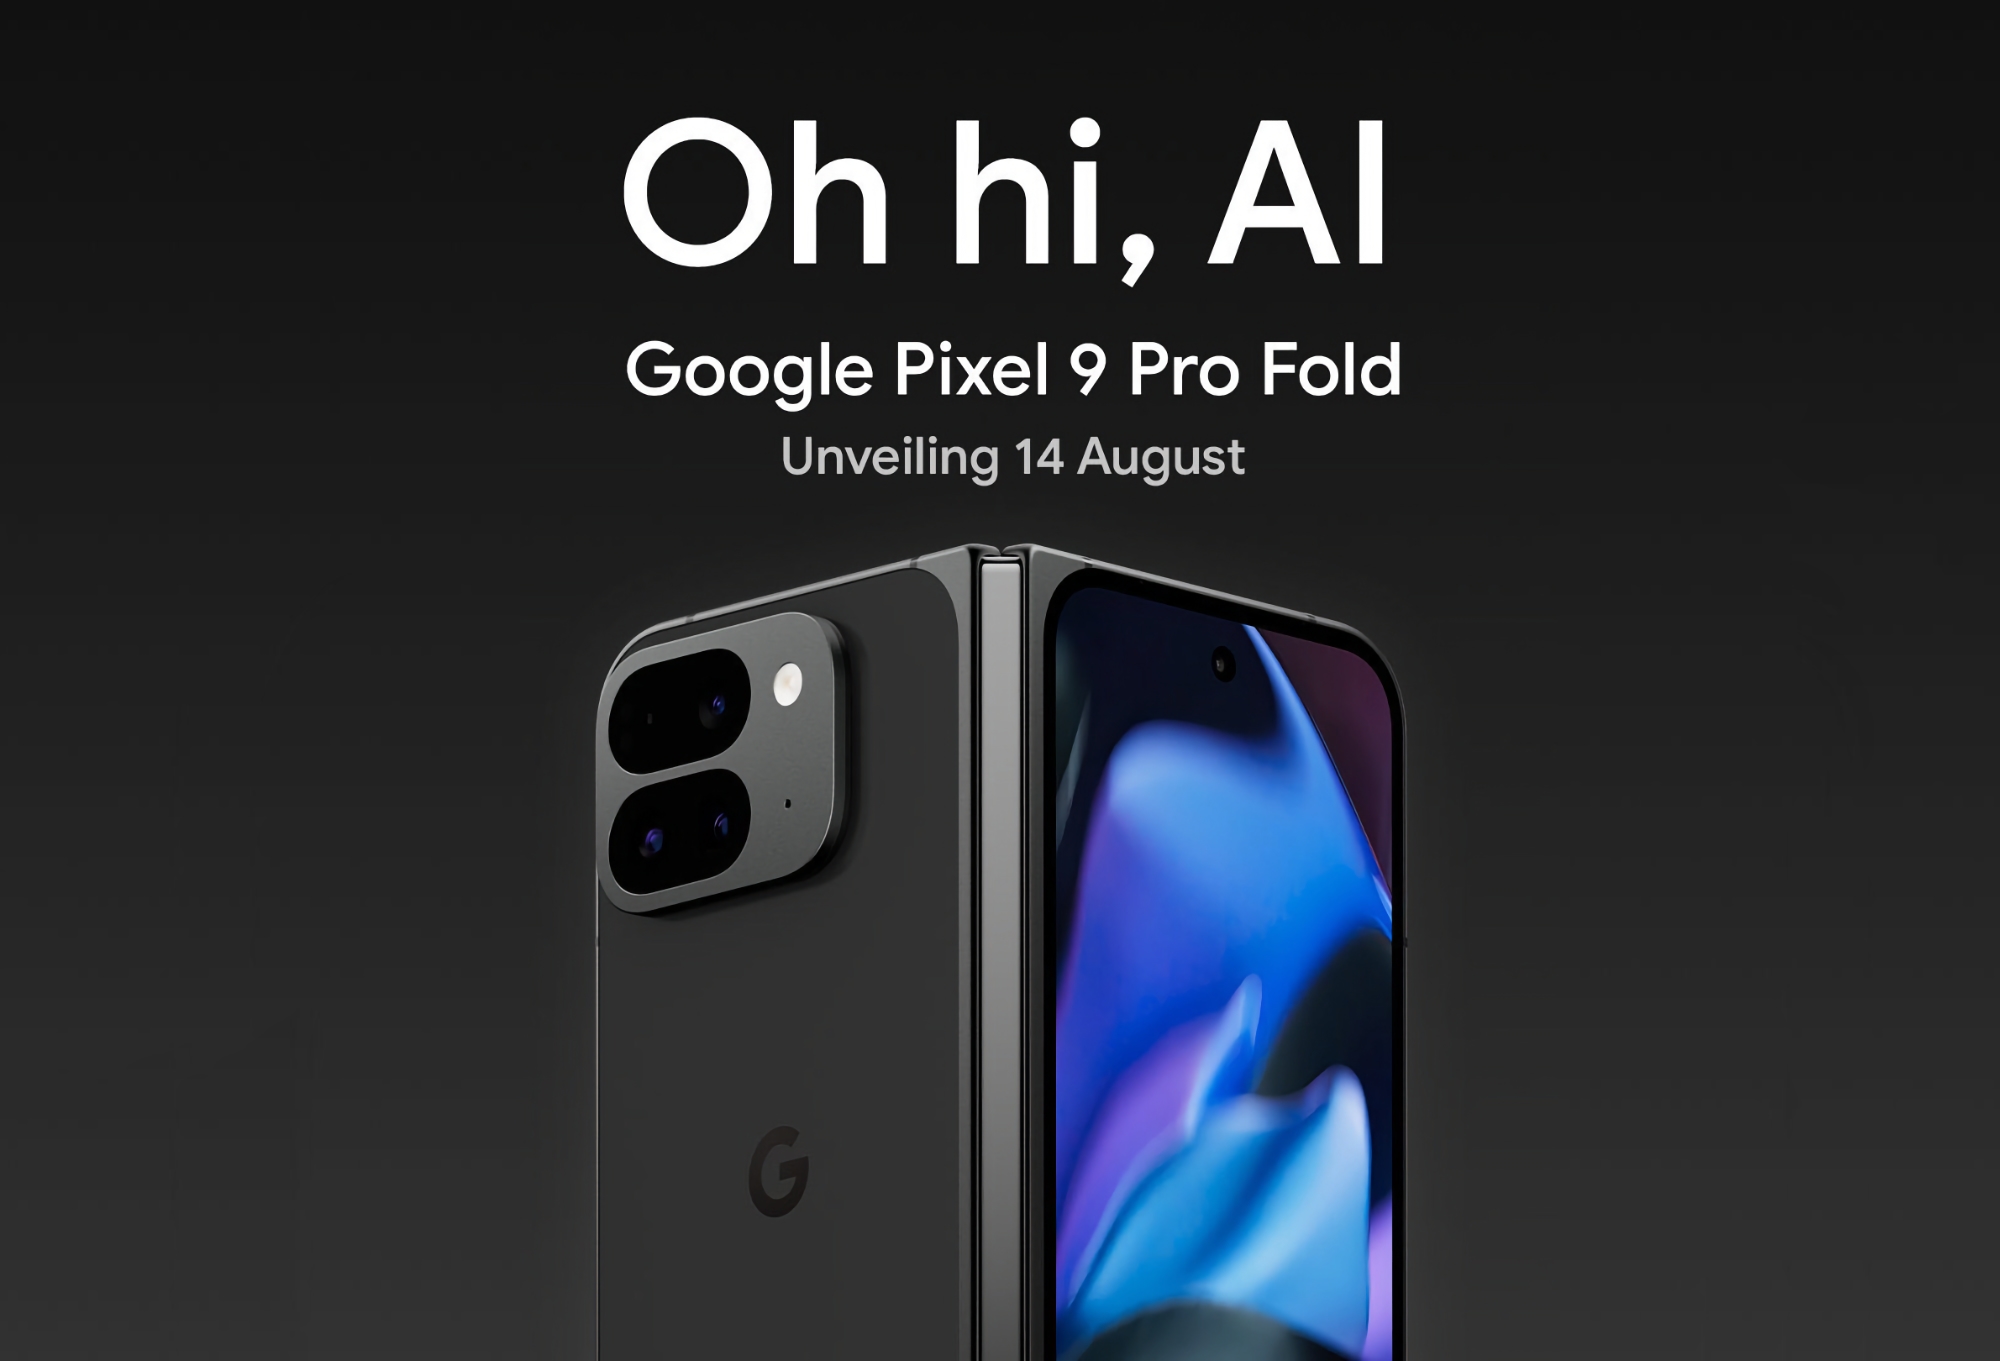 Google has confirmed that it will show off the Pixel 9 Pro Fold foldable smartphone at a presentation on 14 August